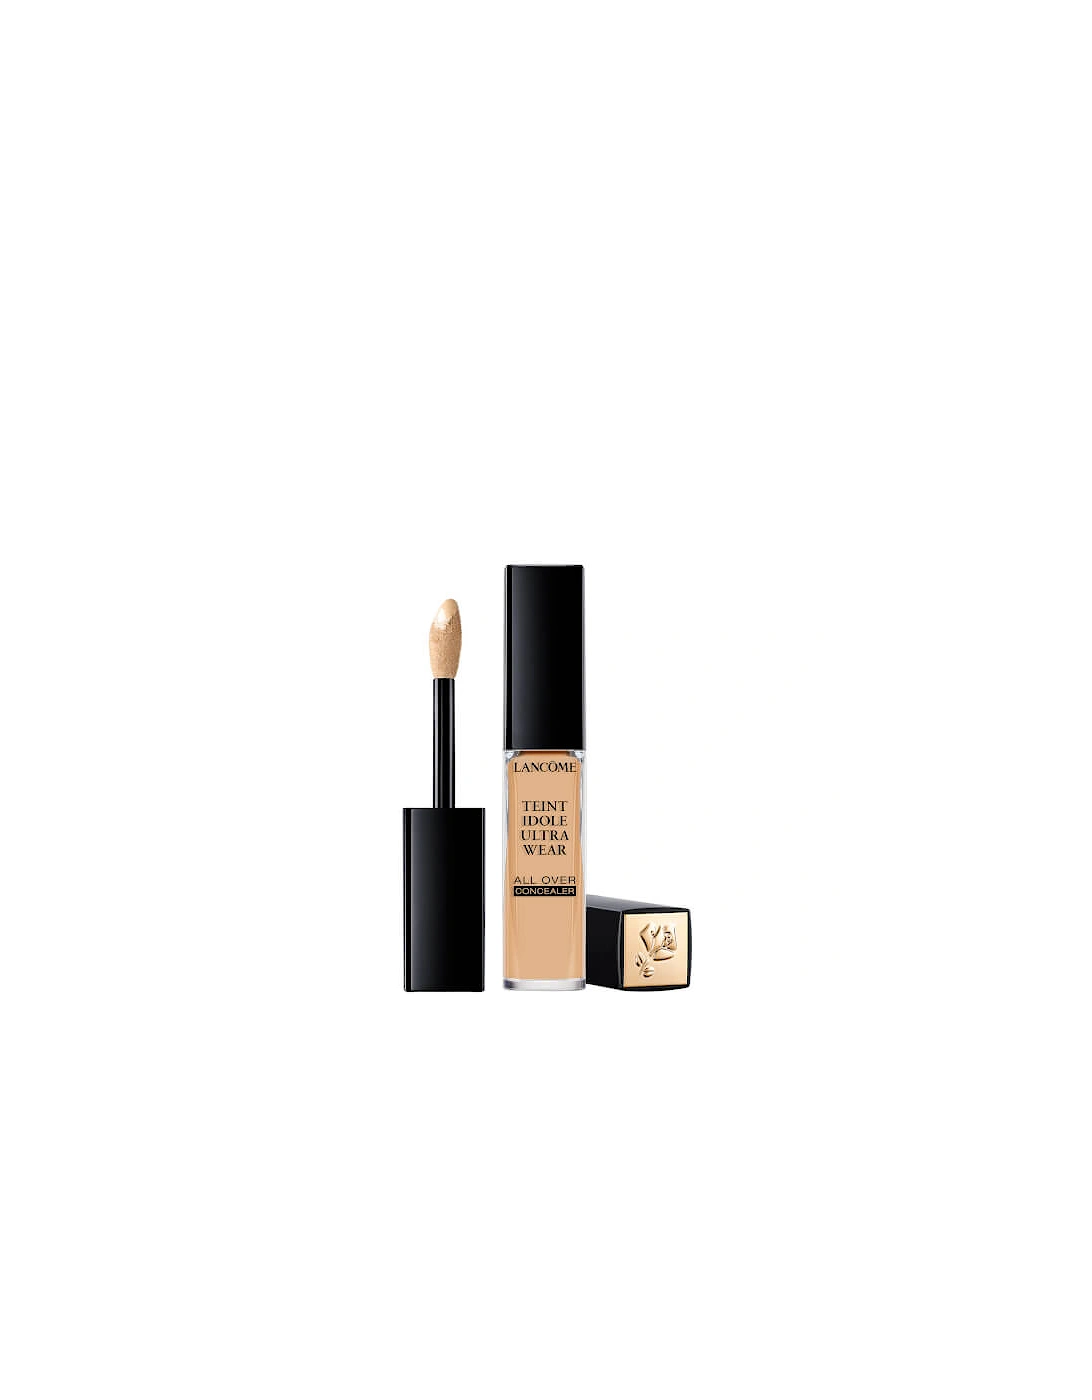 Teint Idole Ultra Wear All Over Concealer - 250 Bisque W 025, 2 of 1